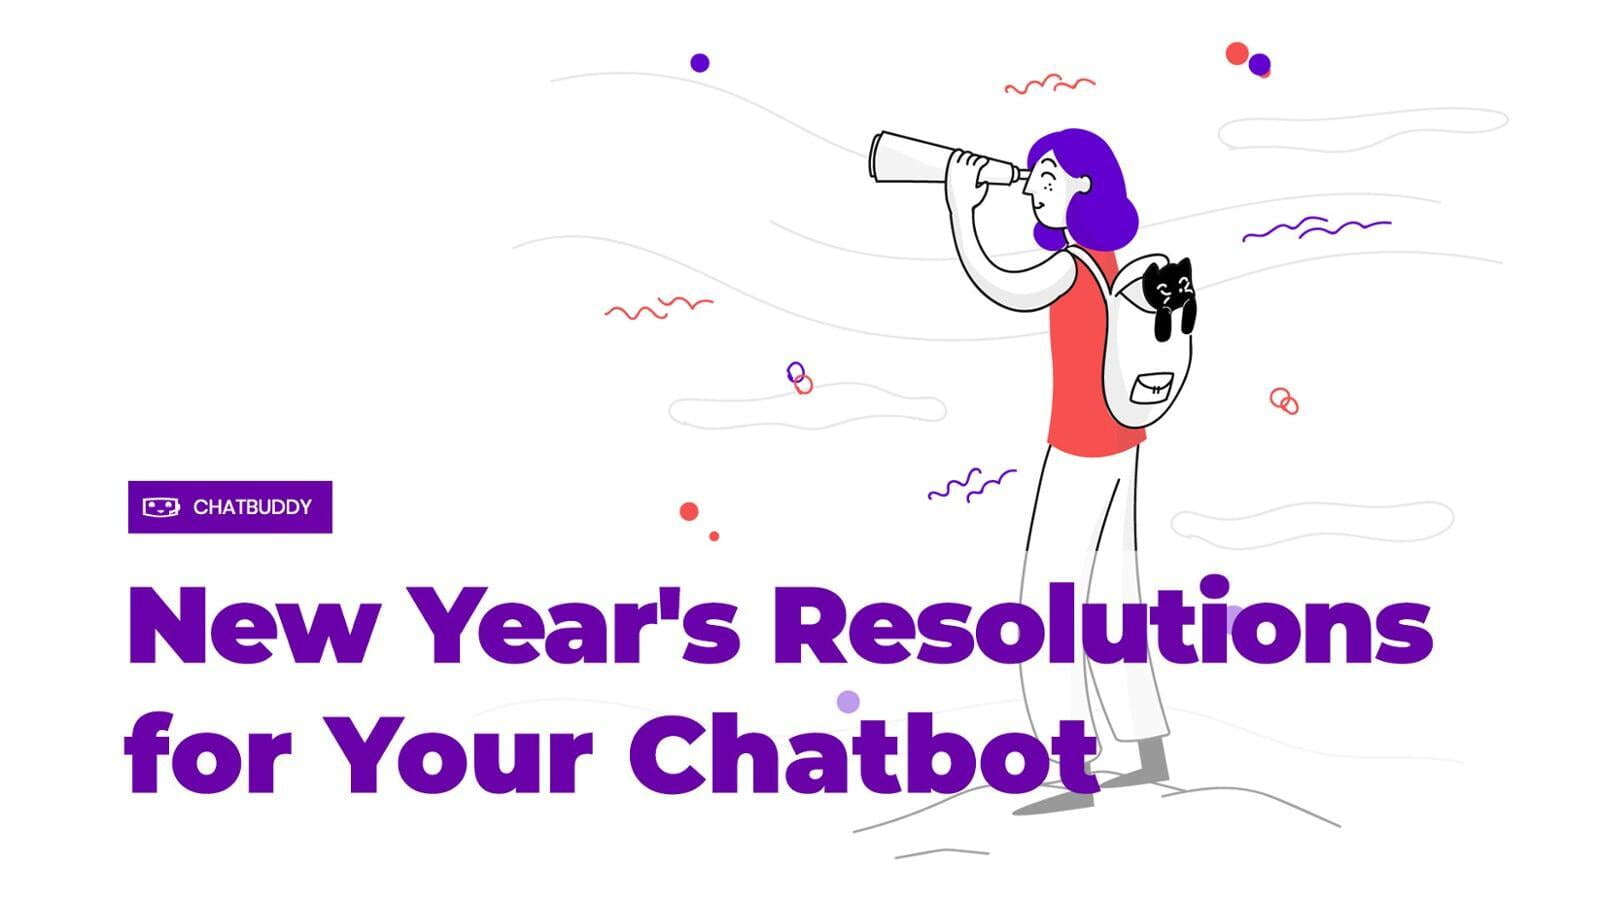 New Year's Resolutions for Your Chatbot